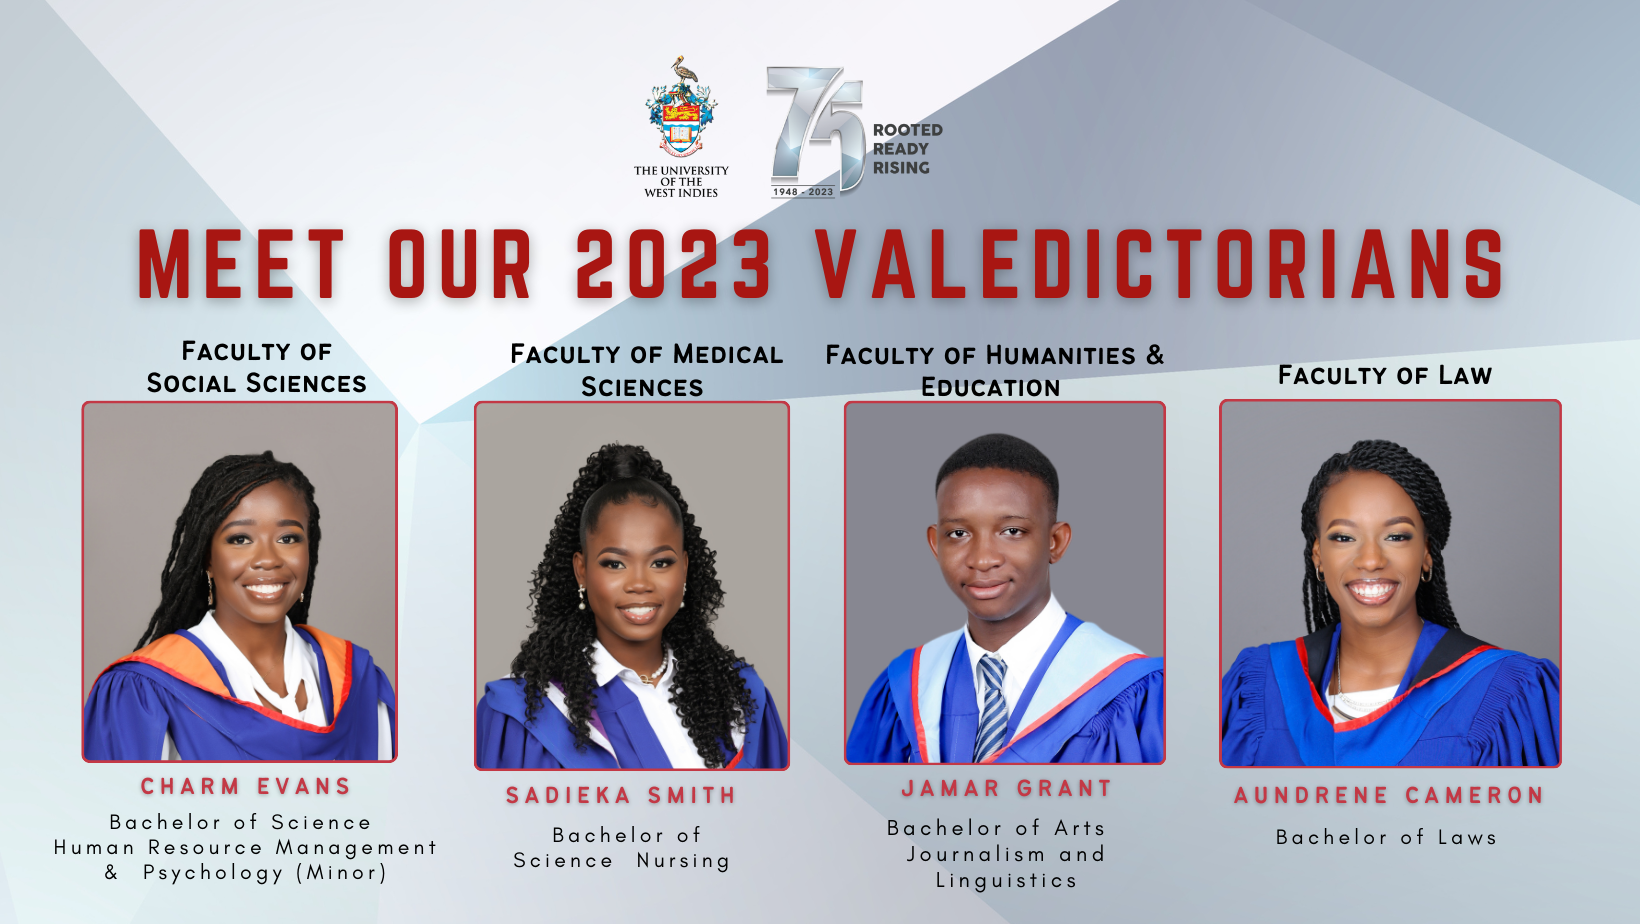 The UWI Mona’s Valedictorians for the Class of 2023